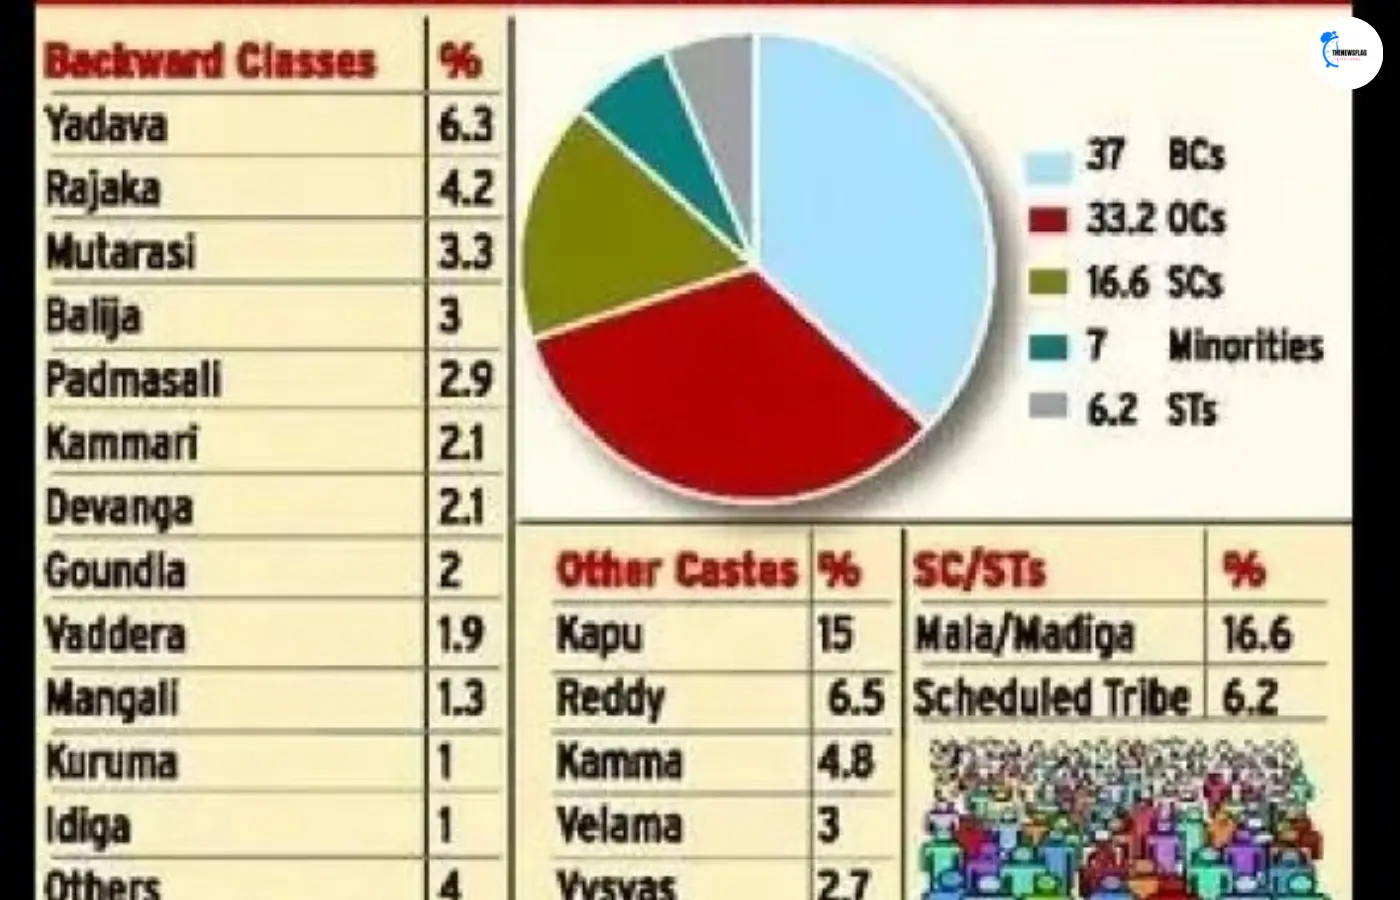 Why is Reddy caste most powerful caste in Andhra Pradesh and Telangana?